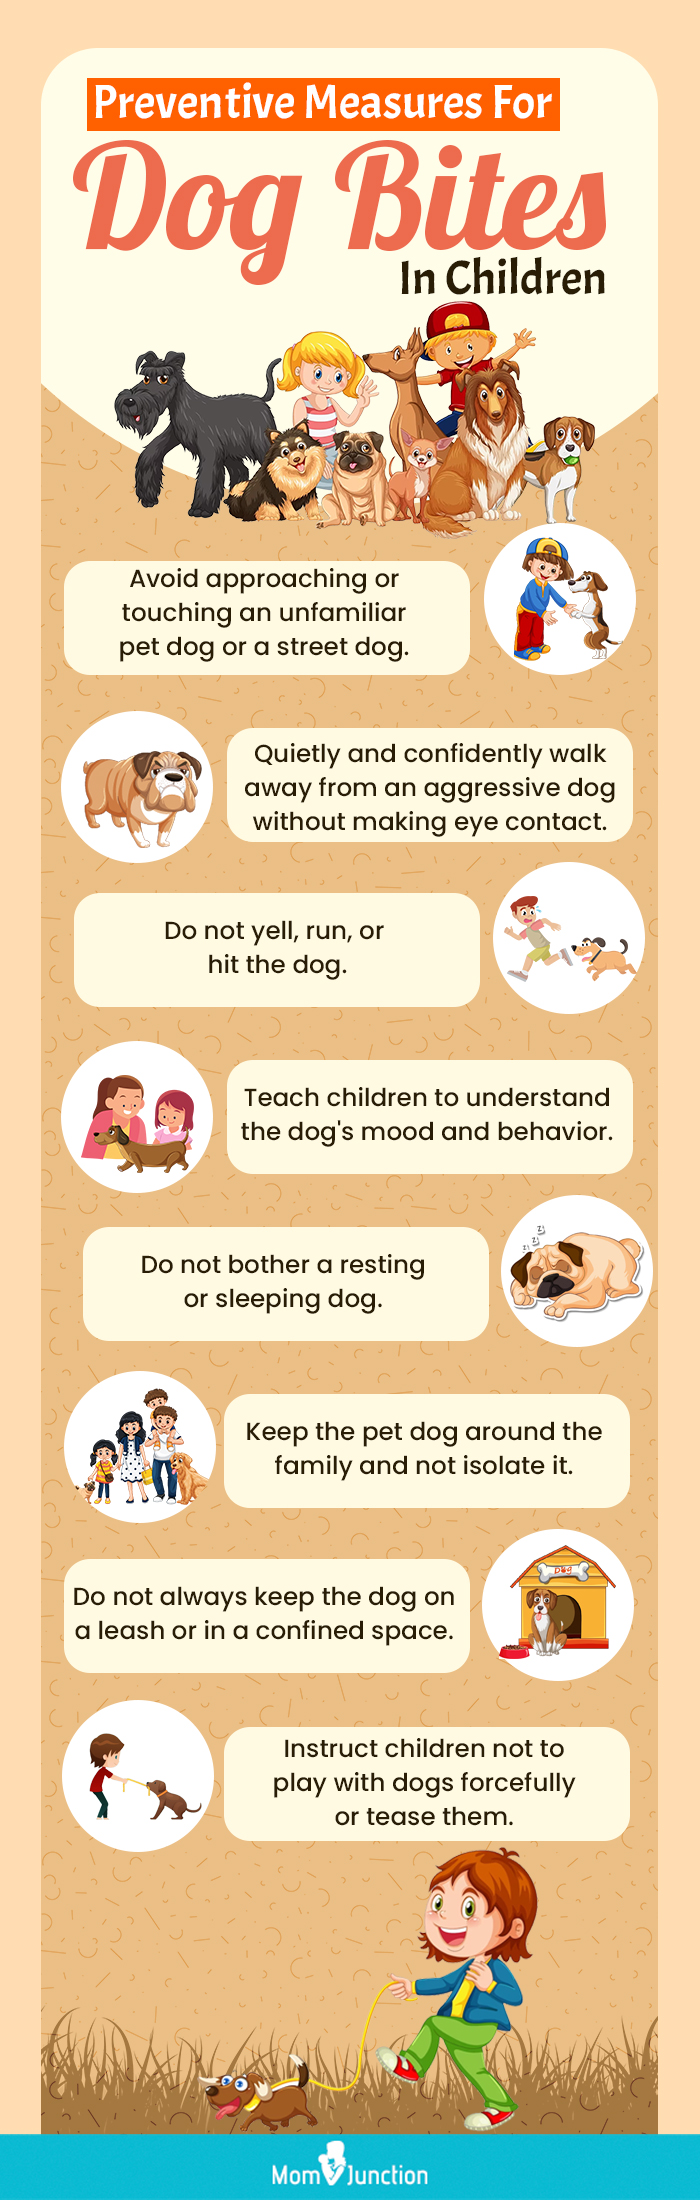 15 Tips To Prevent Dog Bites In Children & When To Visit Doctor